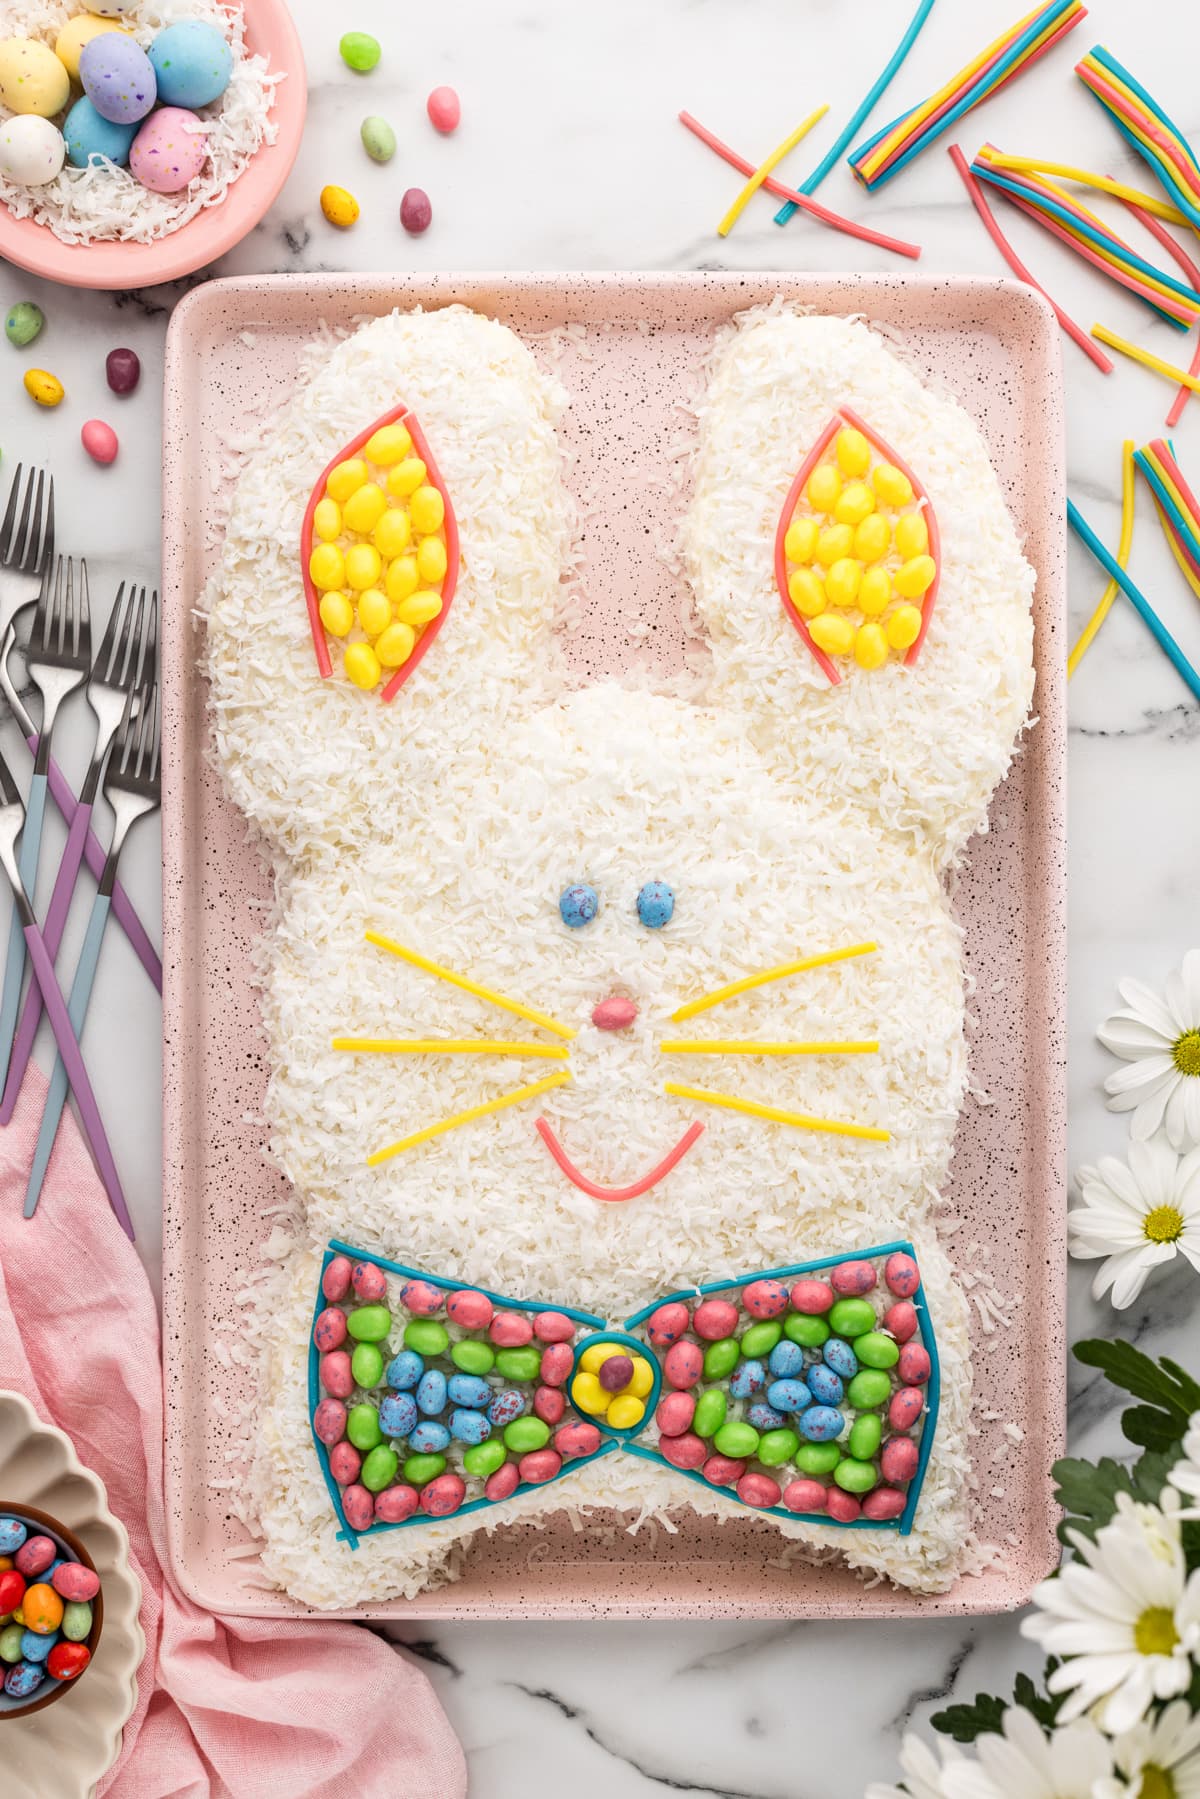 Top view of an easter bunny cake decorated with coconut and candy.